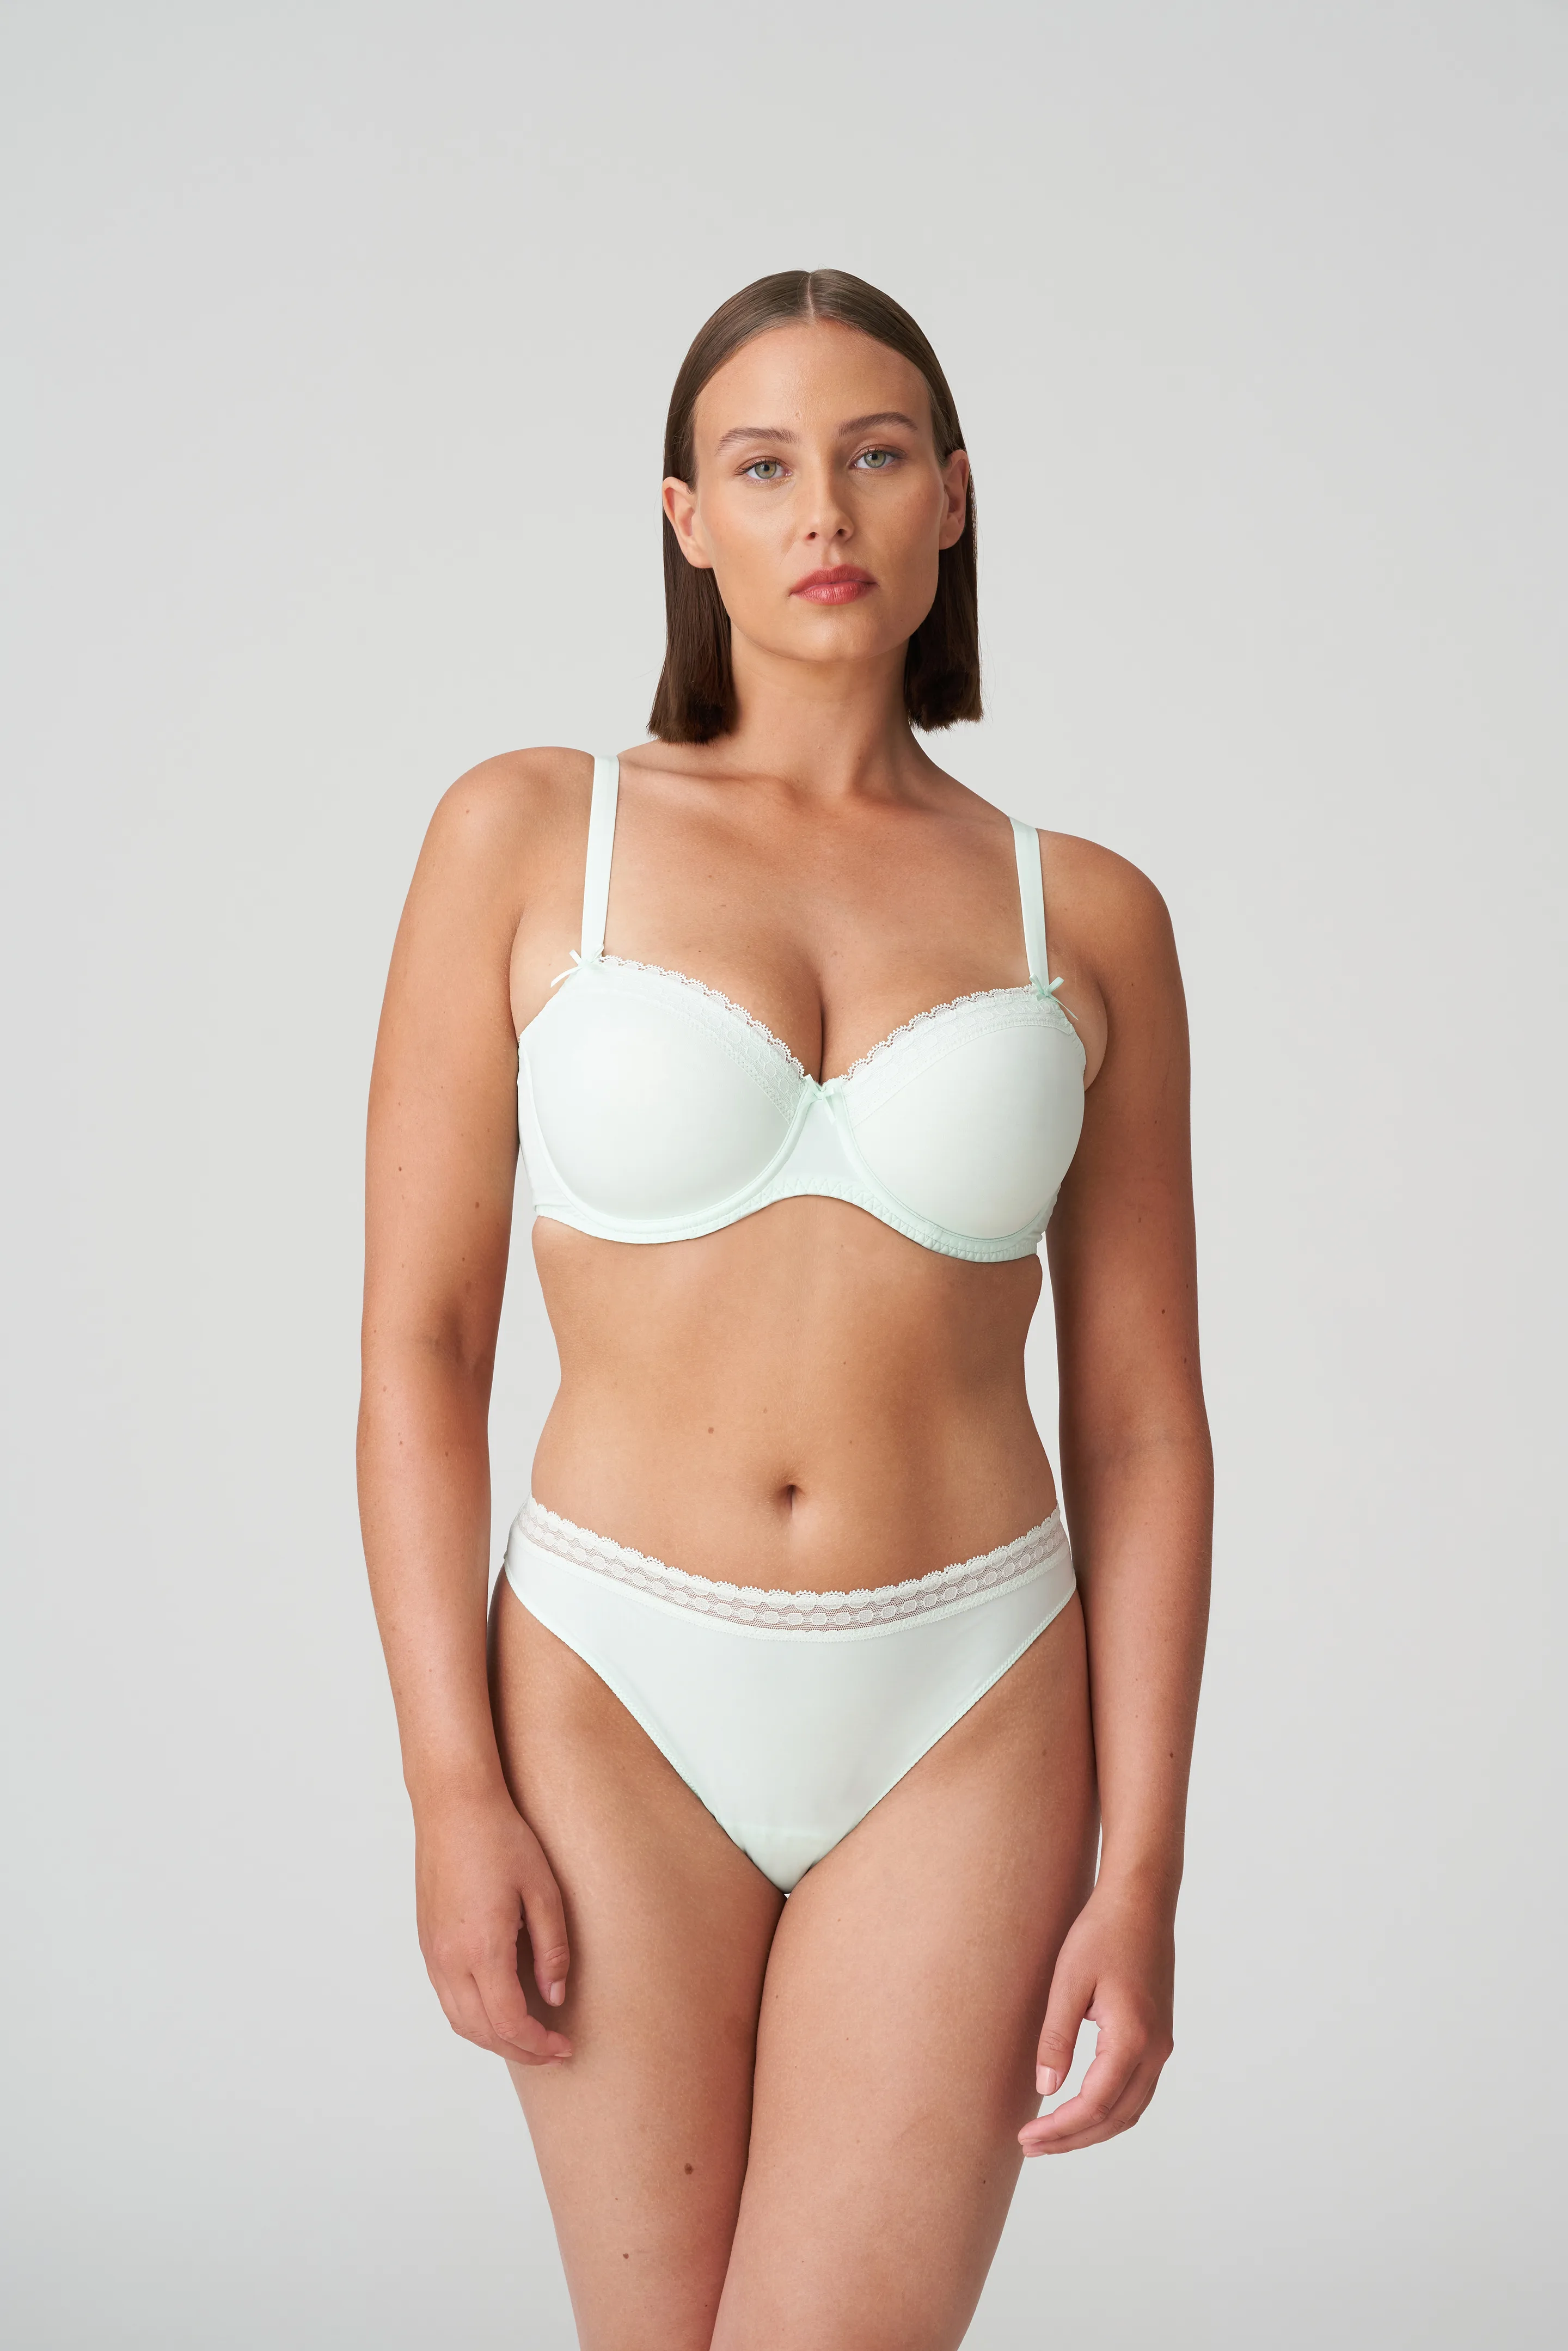 Donna Bella Lingerie Wangaratta - NEW COLOUR- FAYREFORM LACE PERFECT COLOUR  GULL GREY. This ultra light moulded cup provides great support and is light  weight on the body. $ 69.95 #fayreformlingerie #bendonlingerie #